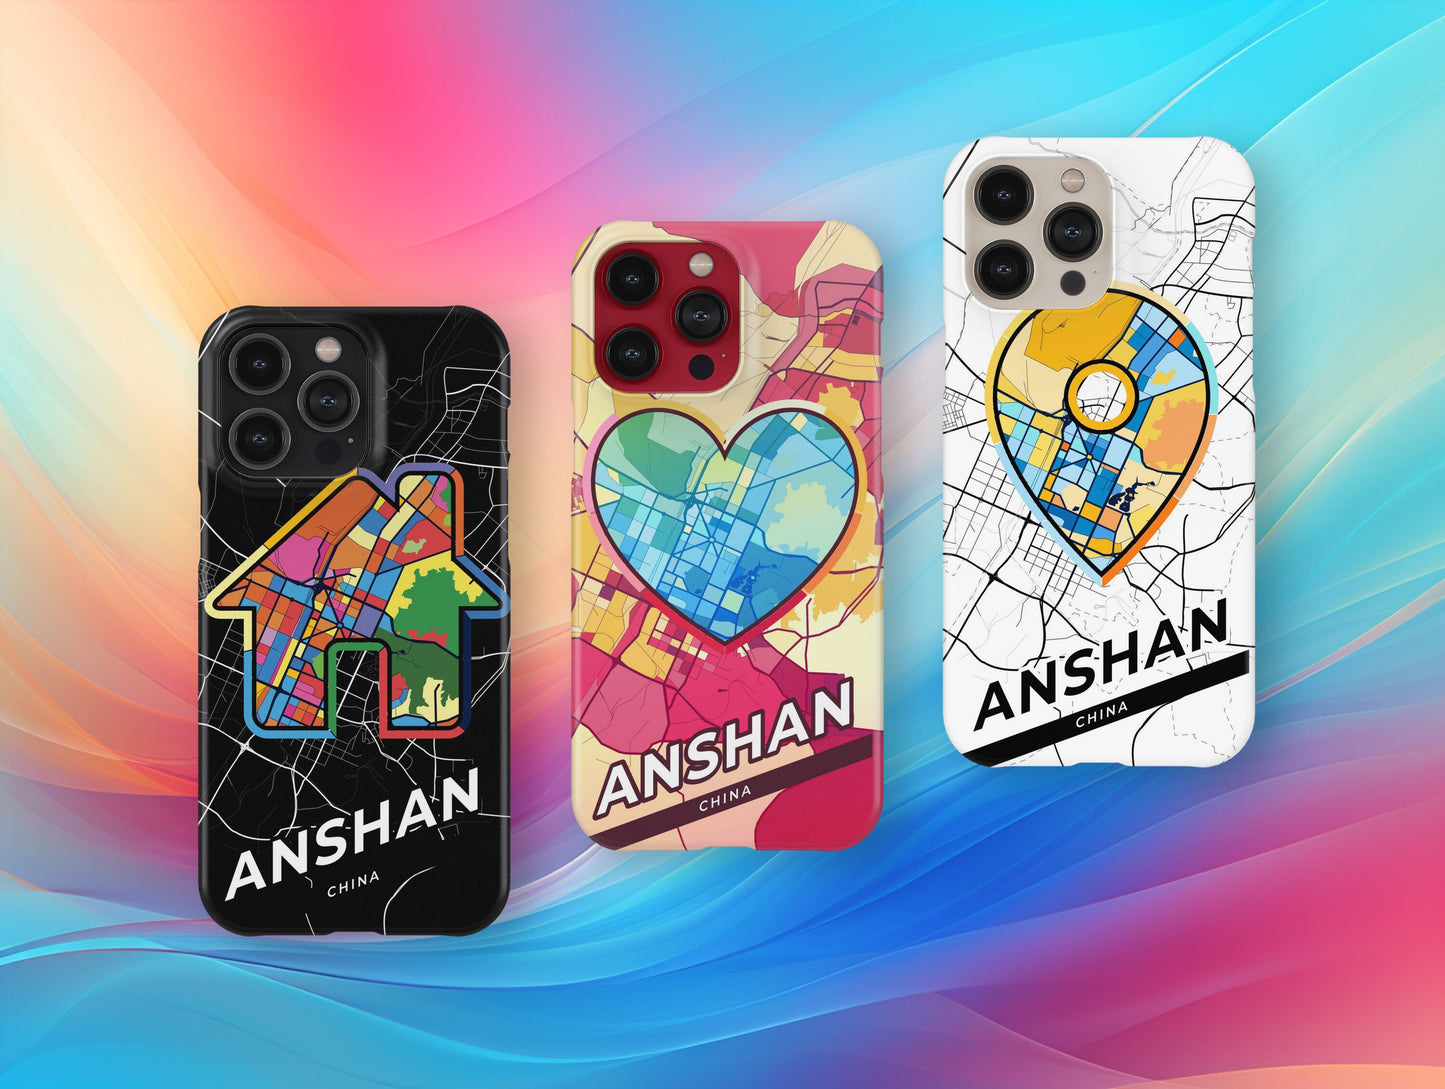 Anshan China slim phone case with colorful icon. Birthday, wedding or housewarming gift. Couple match cases.